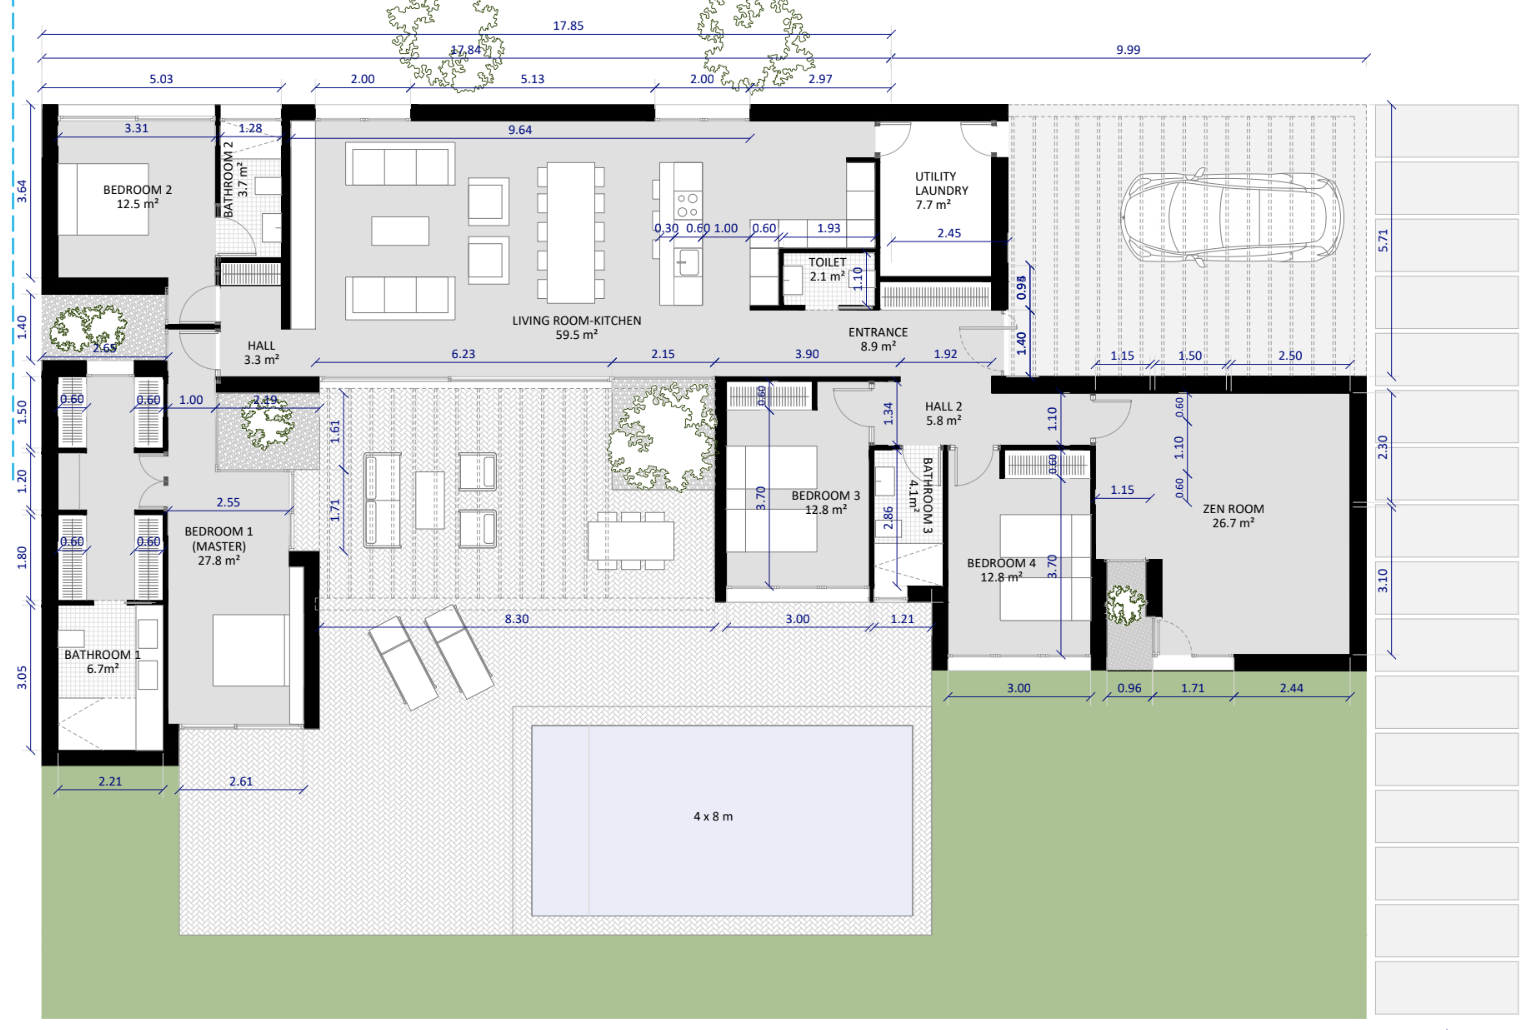 Floor plan for Villa ref 3765 for sale in Altaona Golf And Country Village Spain - Quality Homes Costa Cálida